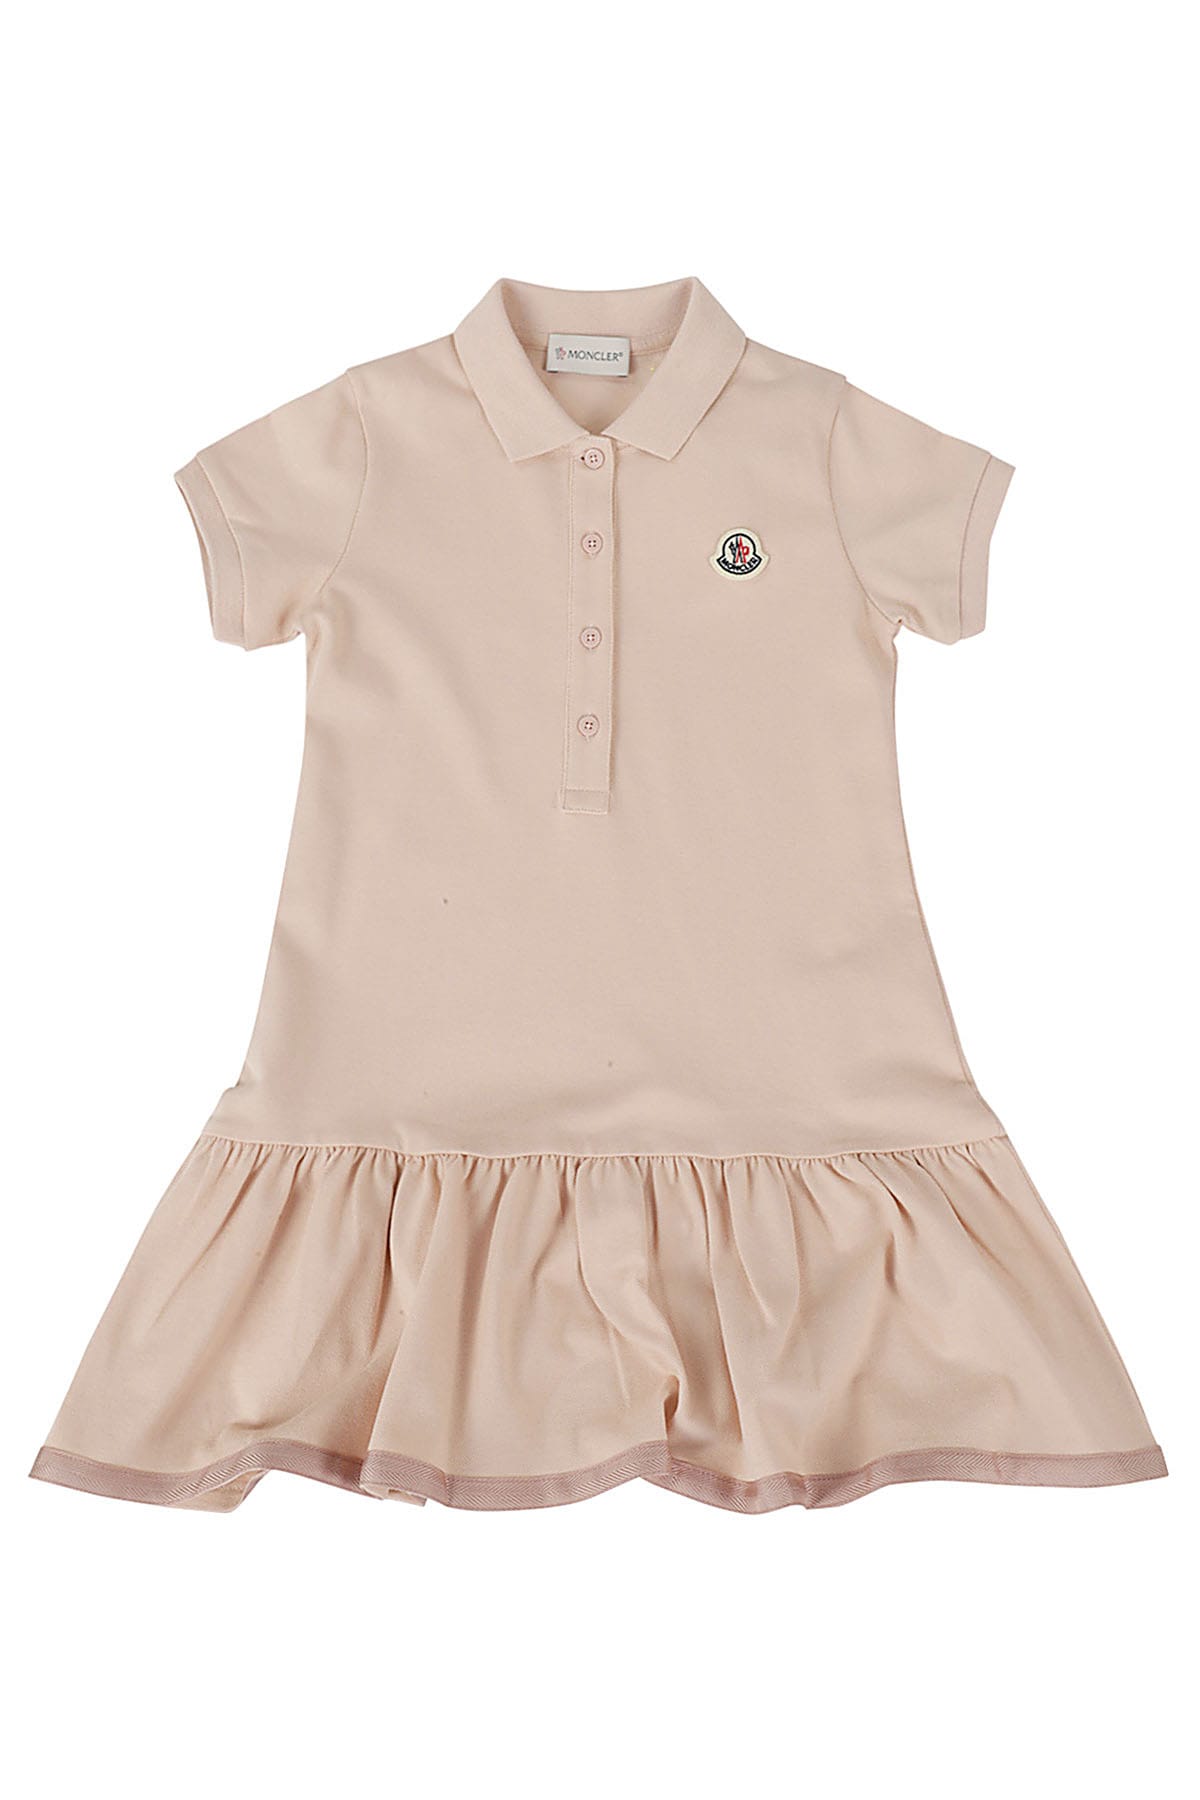 Moncler Kids' Dress Polo Neck In Rosa